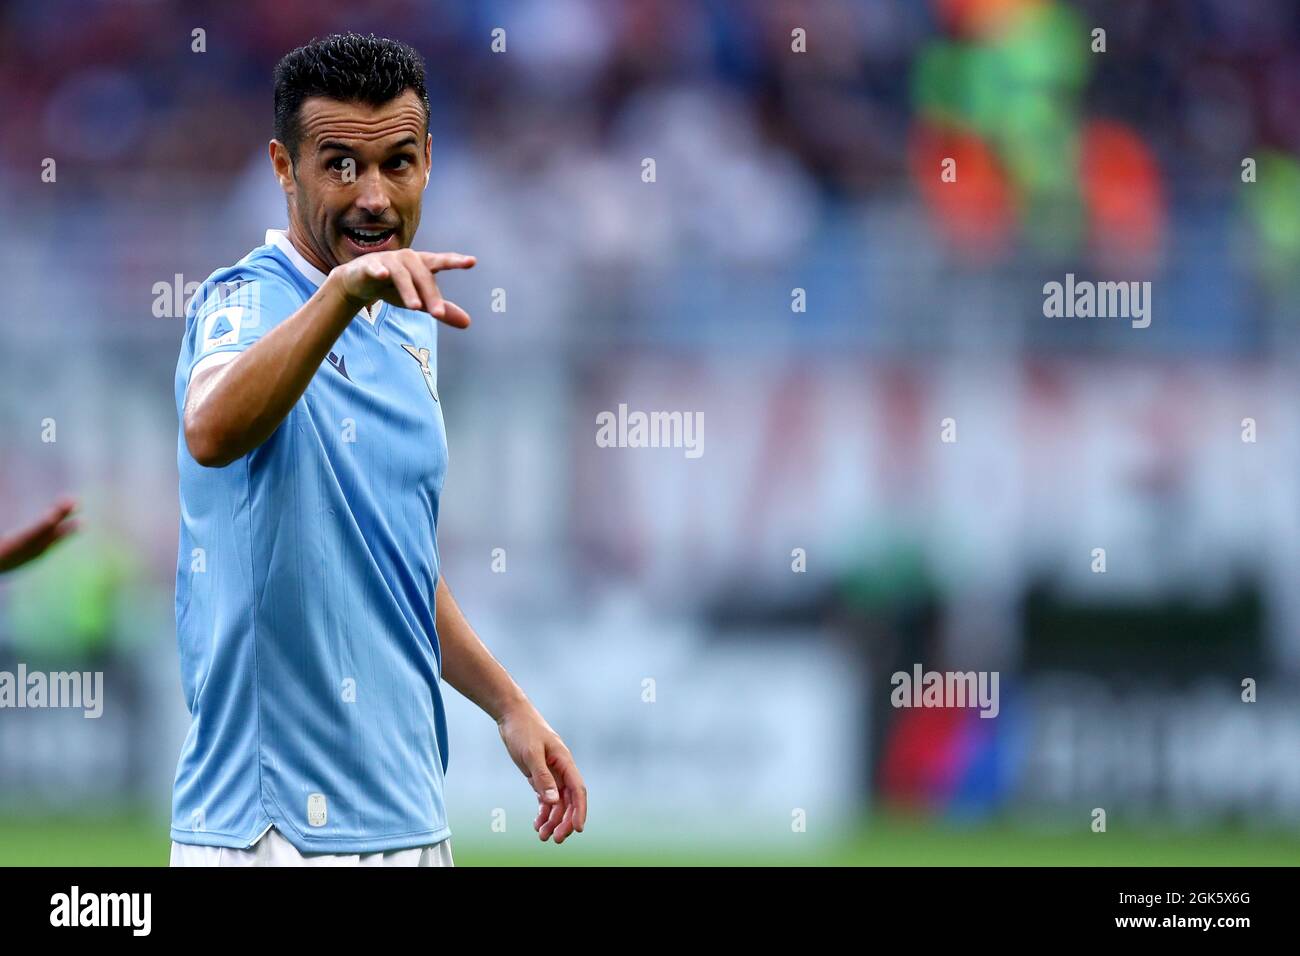 Milano, Italy. 12 September 2021. Pedro Rodriguez Ledesma of Ss Lazio  gestures during the Serie A match between Ac Milan and Ss Lazio. Stock Photo